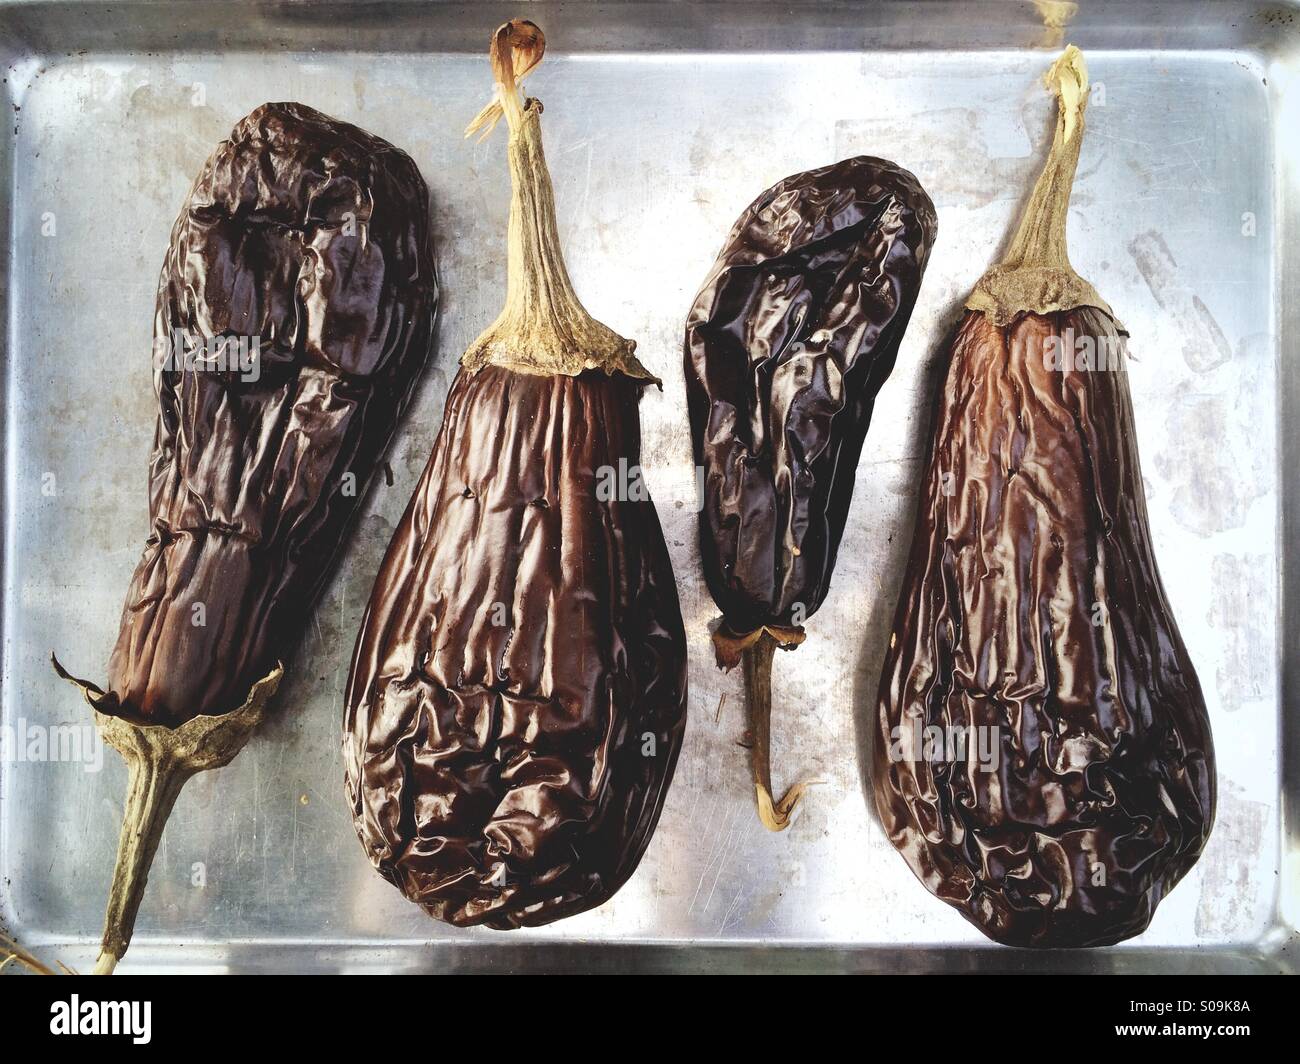 A tray of grilled eggplant or aubergine. Stock Photo